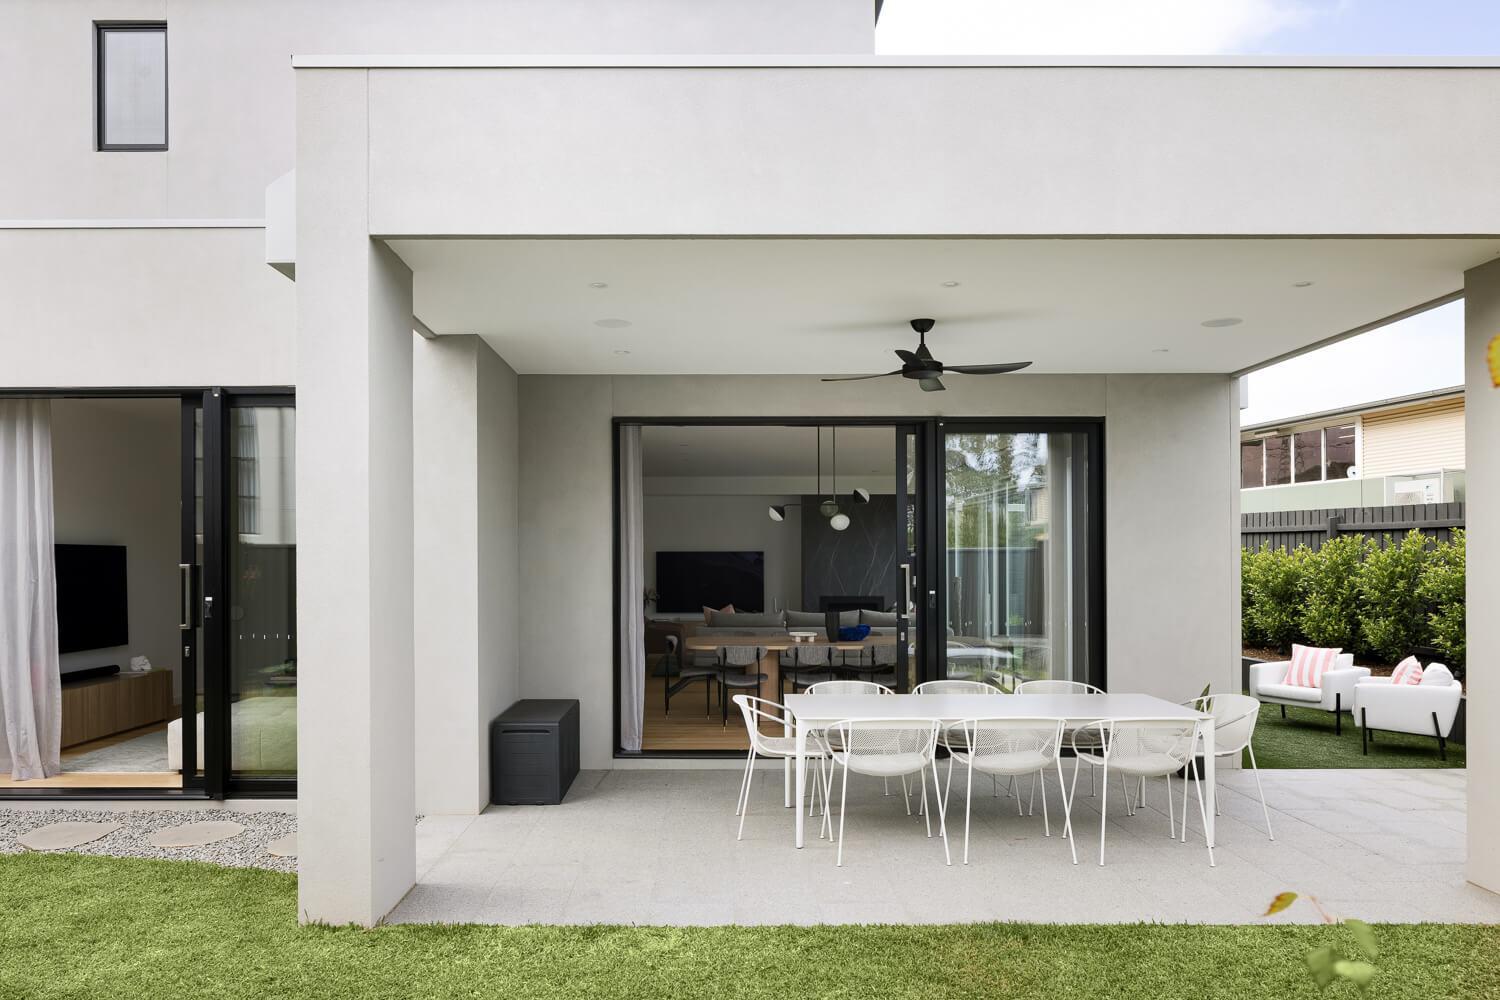 External dining space with large sliding doors connecting to the house